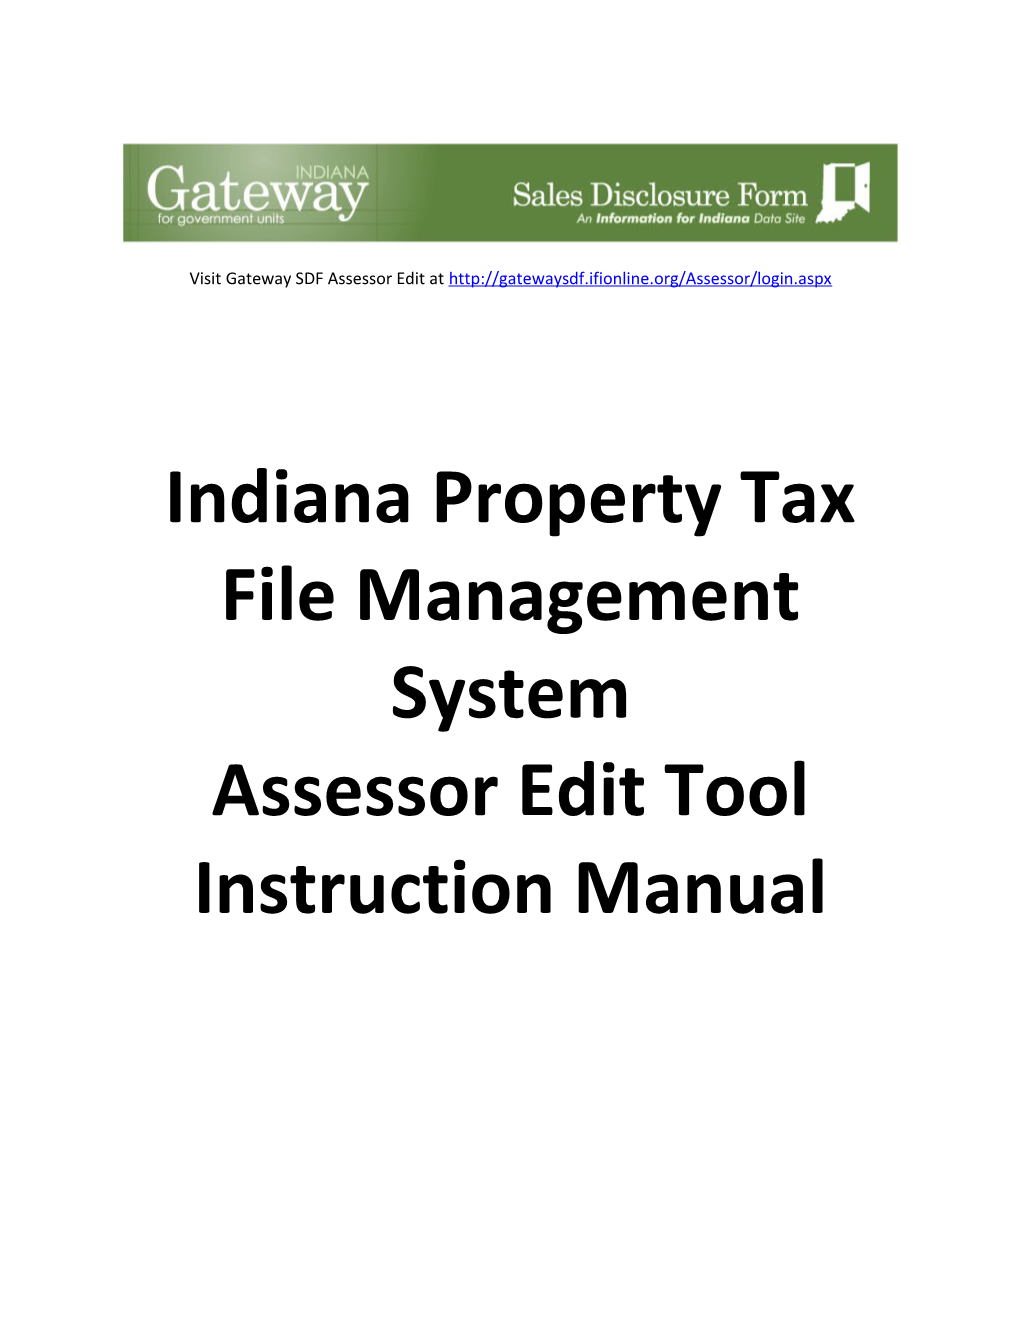 Indiana Property Tax File Management System